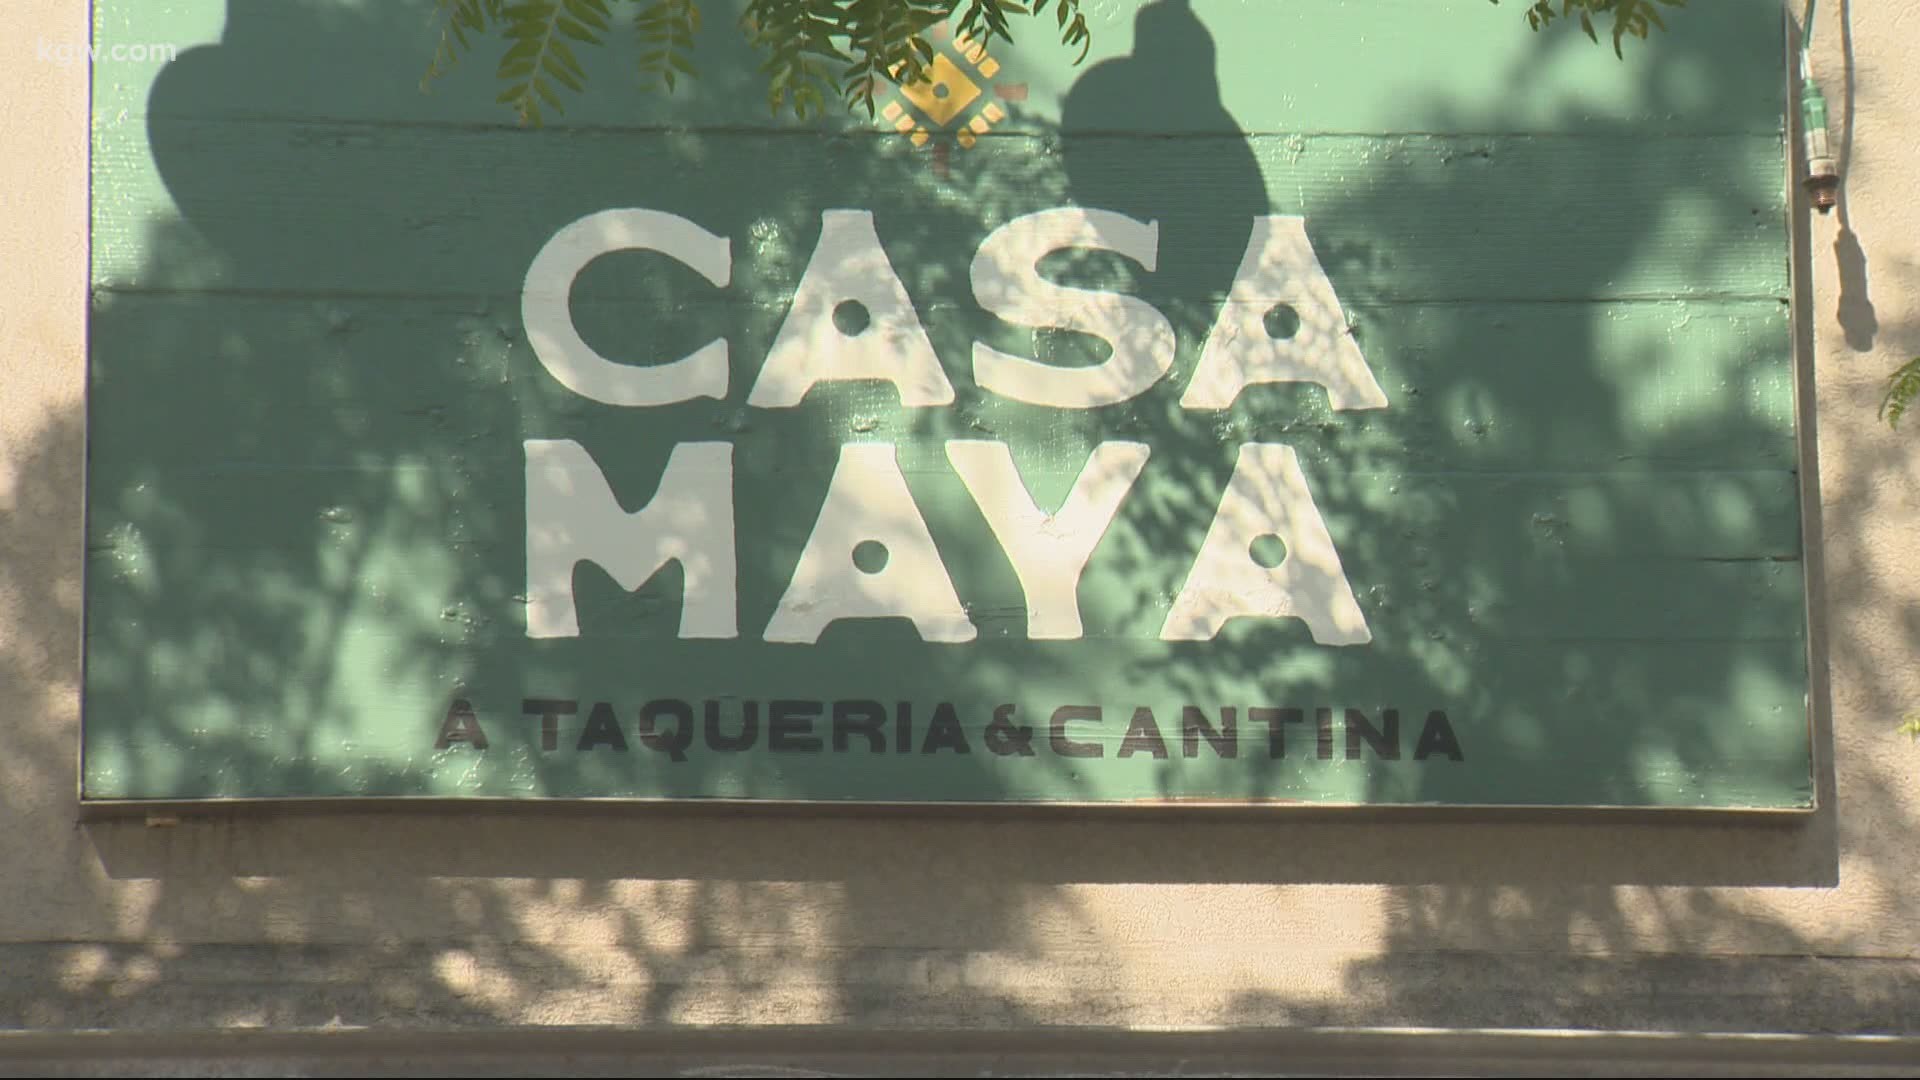 Casa Maya opens during the pandemic as many close their doors.